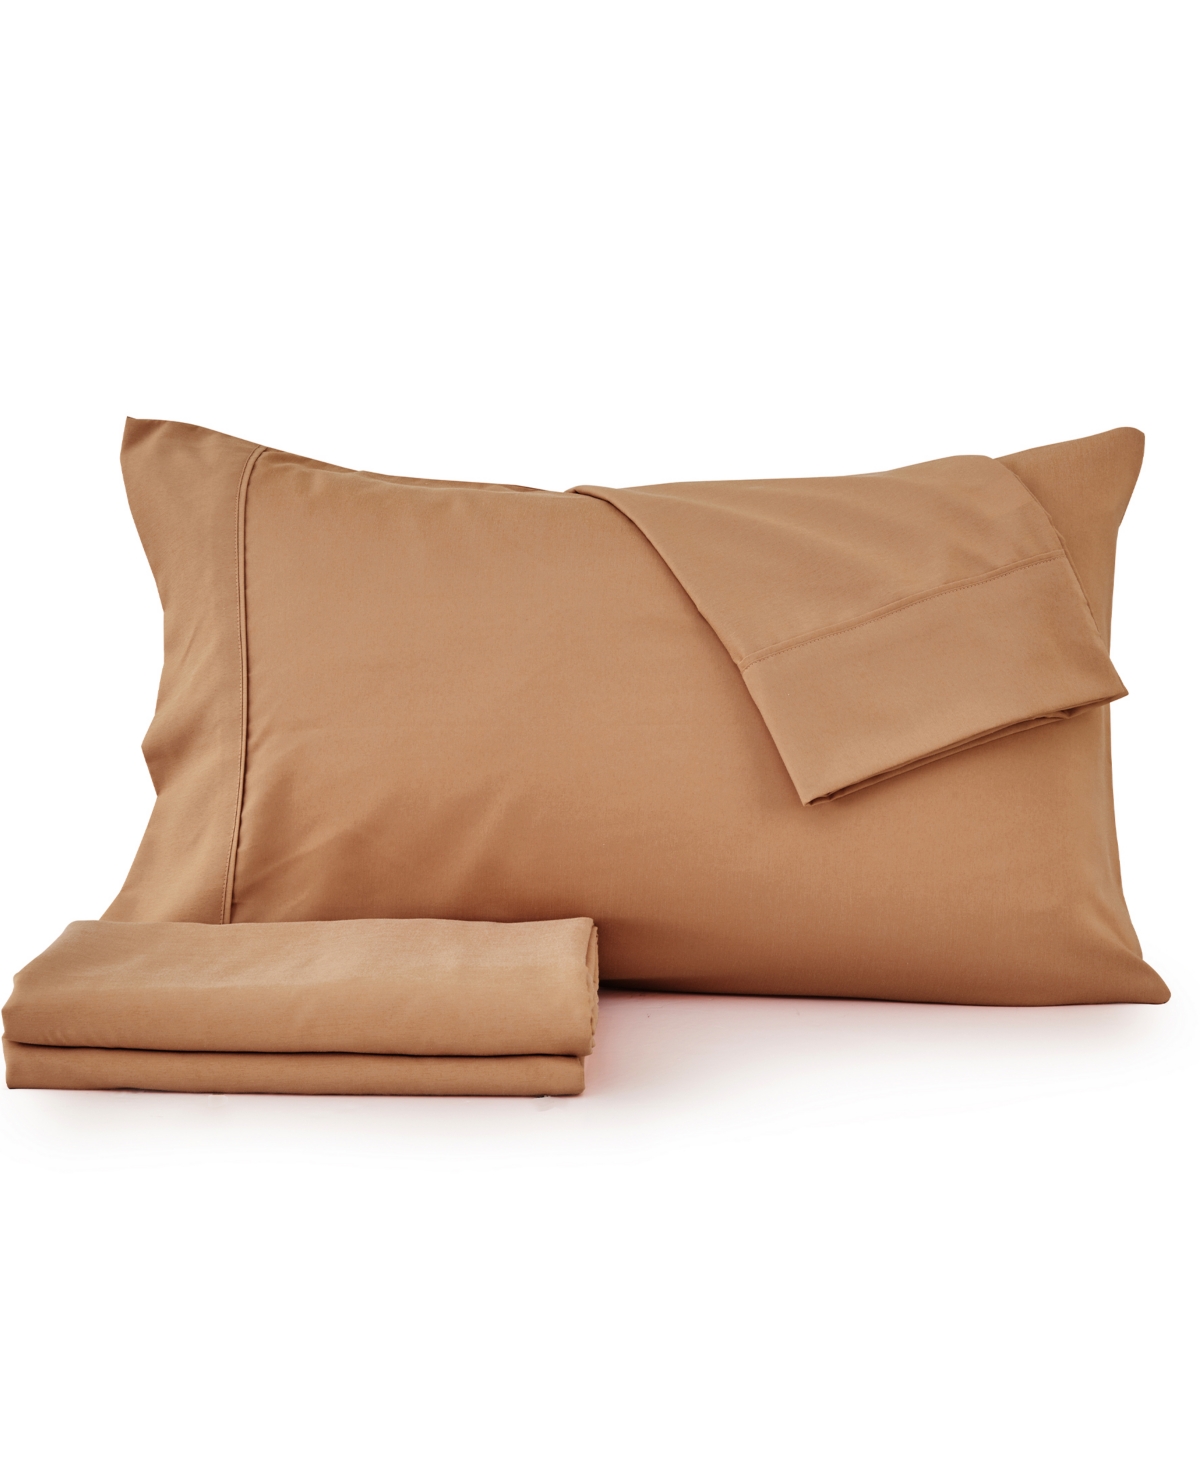 Premium Comforts Rayon From Bamboo Blend Crease-resistant 4 Piece Sheet Set, Queen In Almond